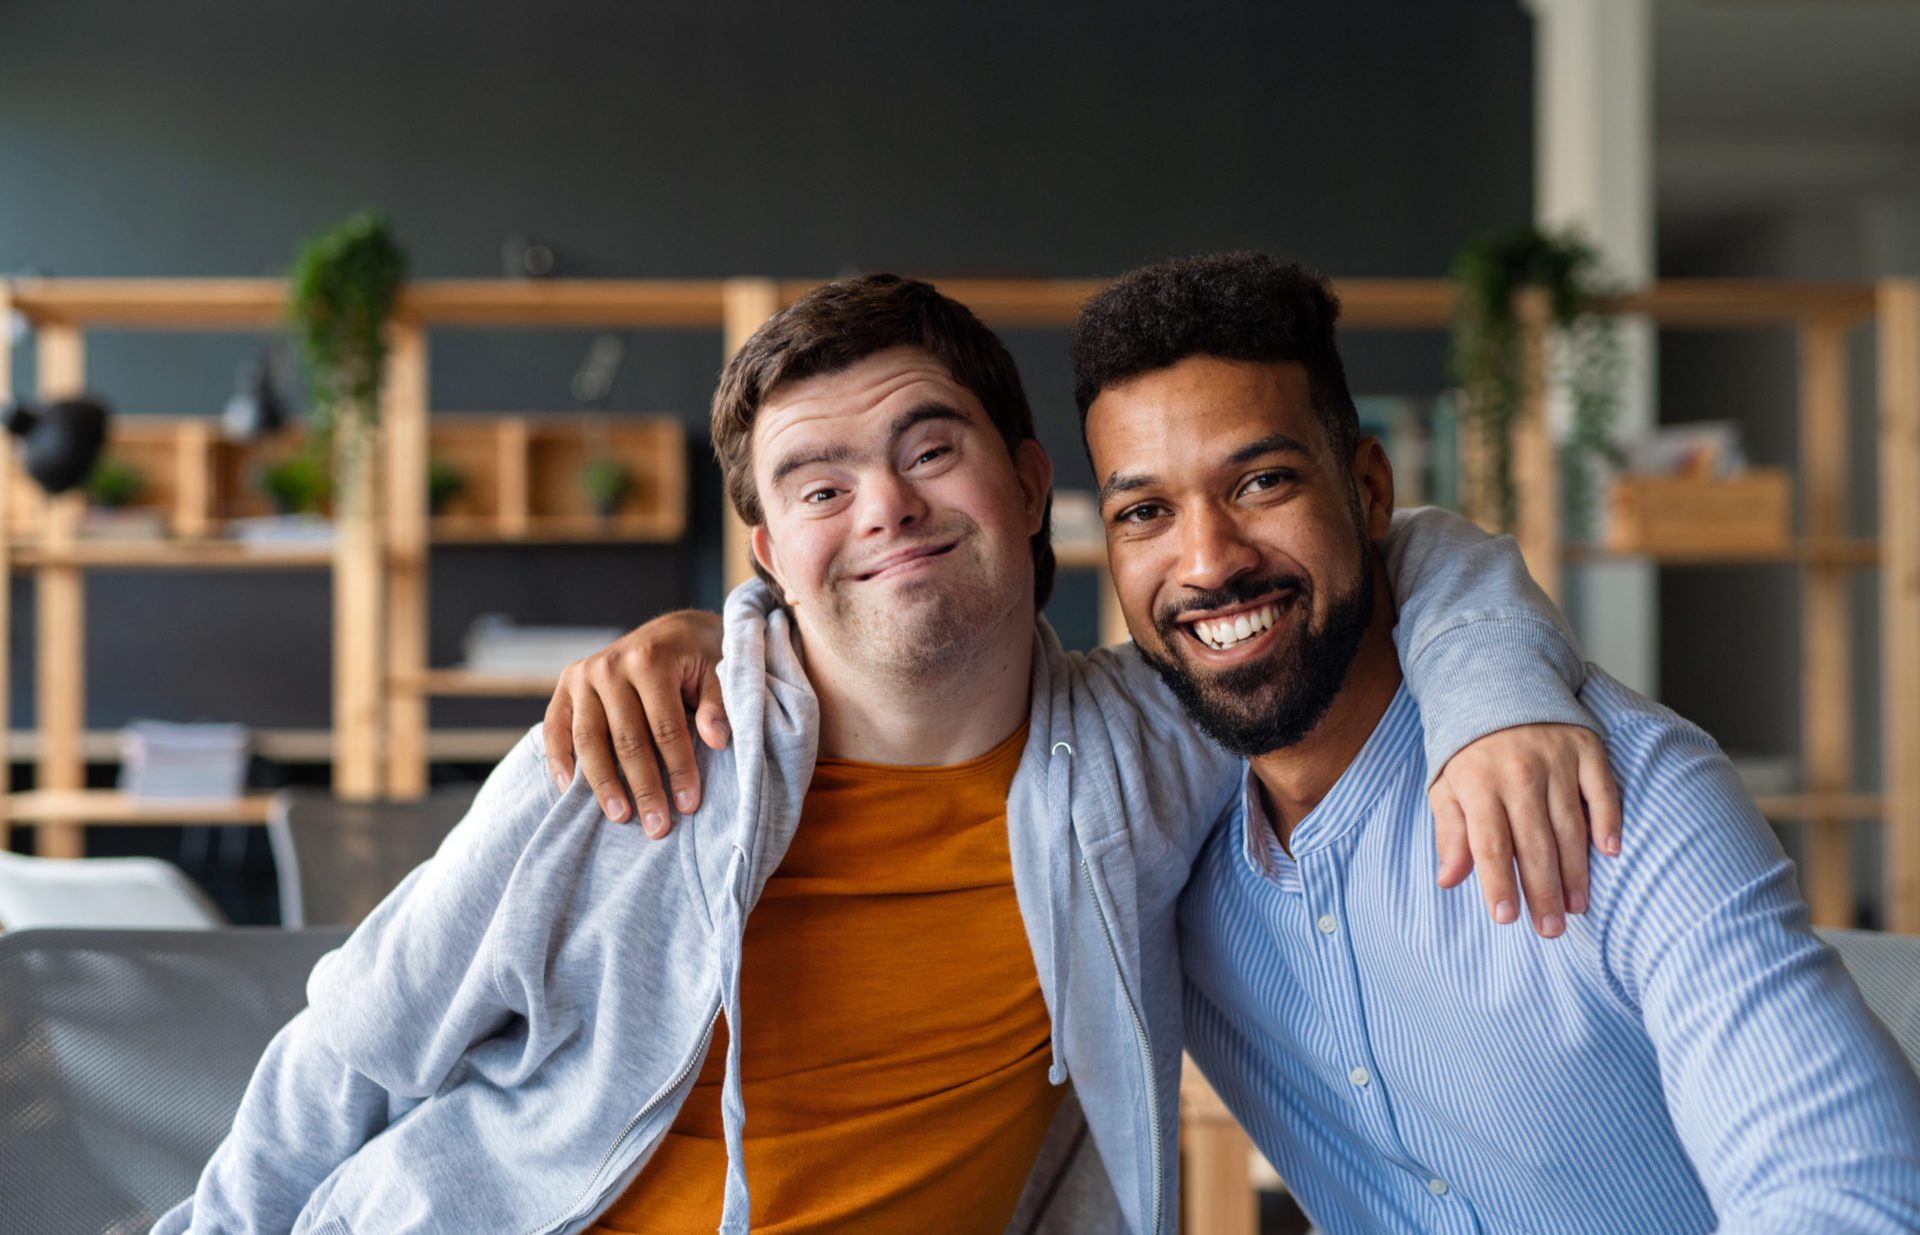 Young man with Down's Syndrome with support worker, arms around each other, looking to camera